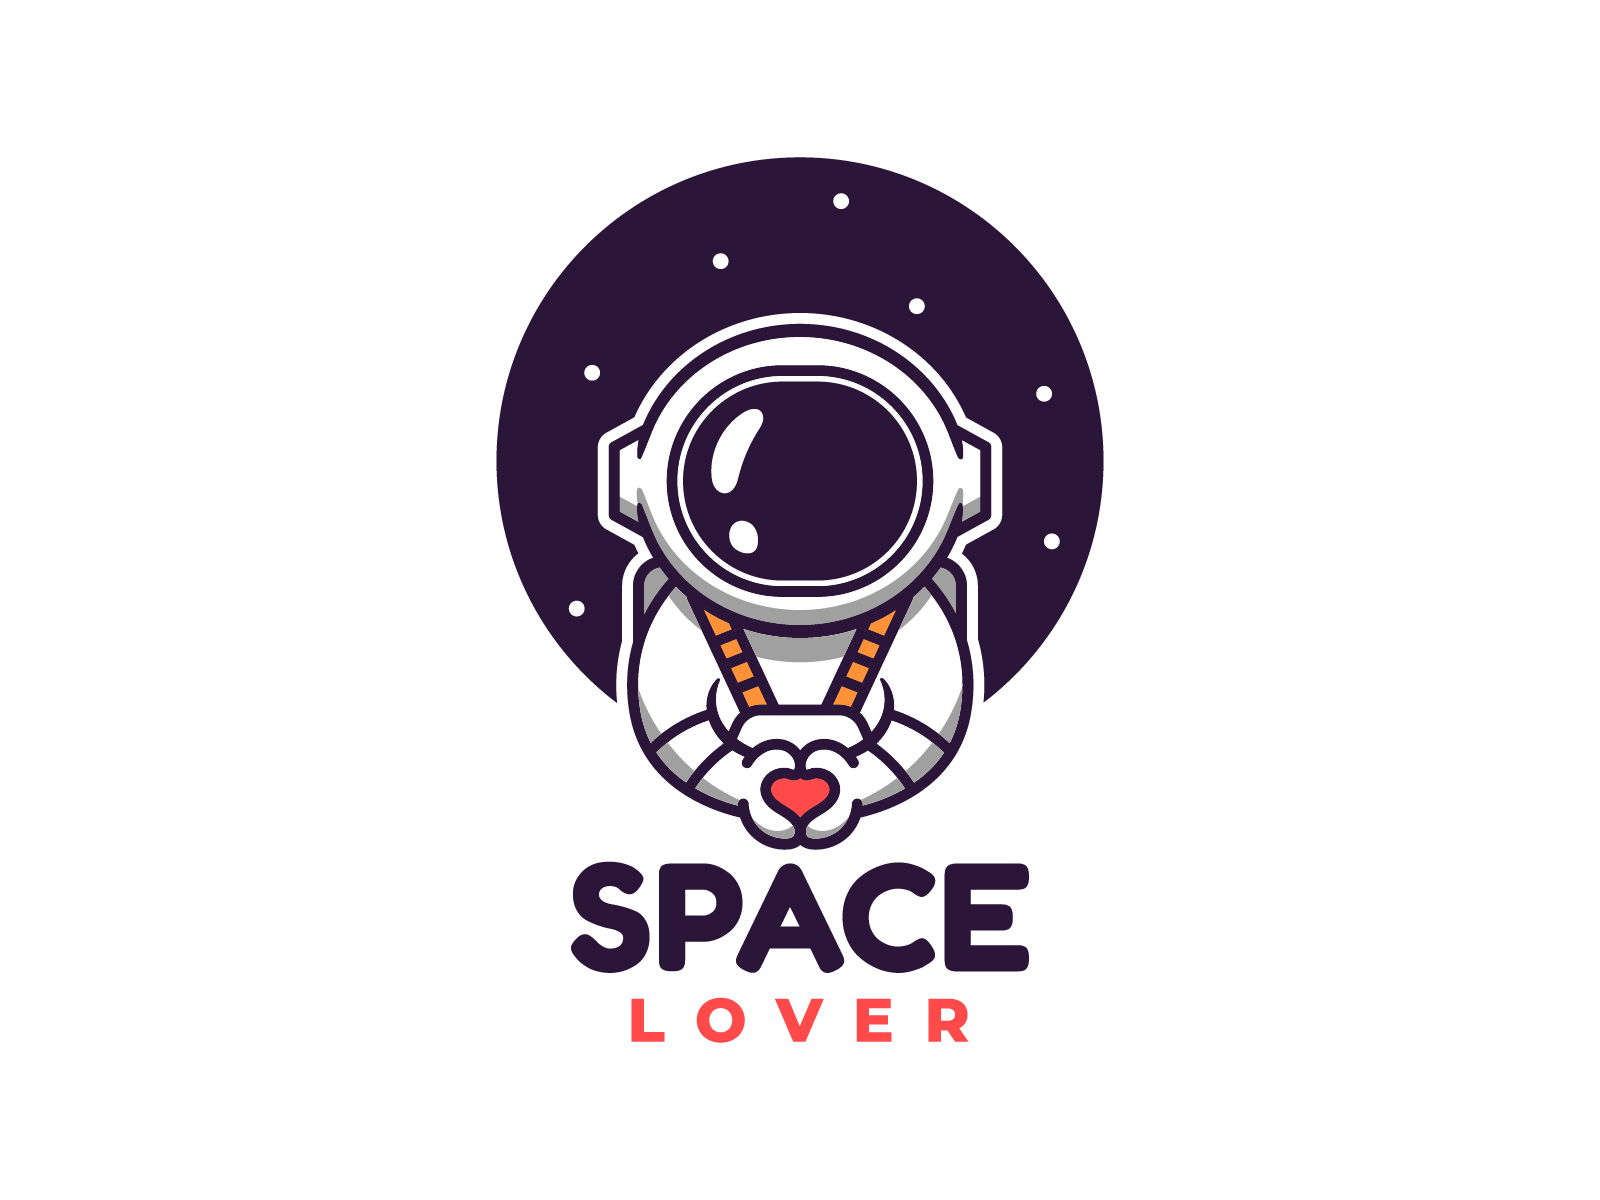 Astronaut Logo Vector Images (over 13,000)